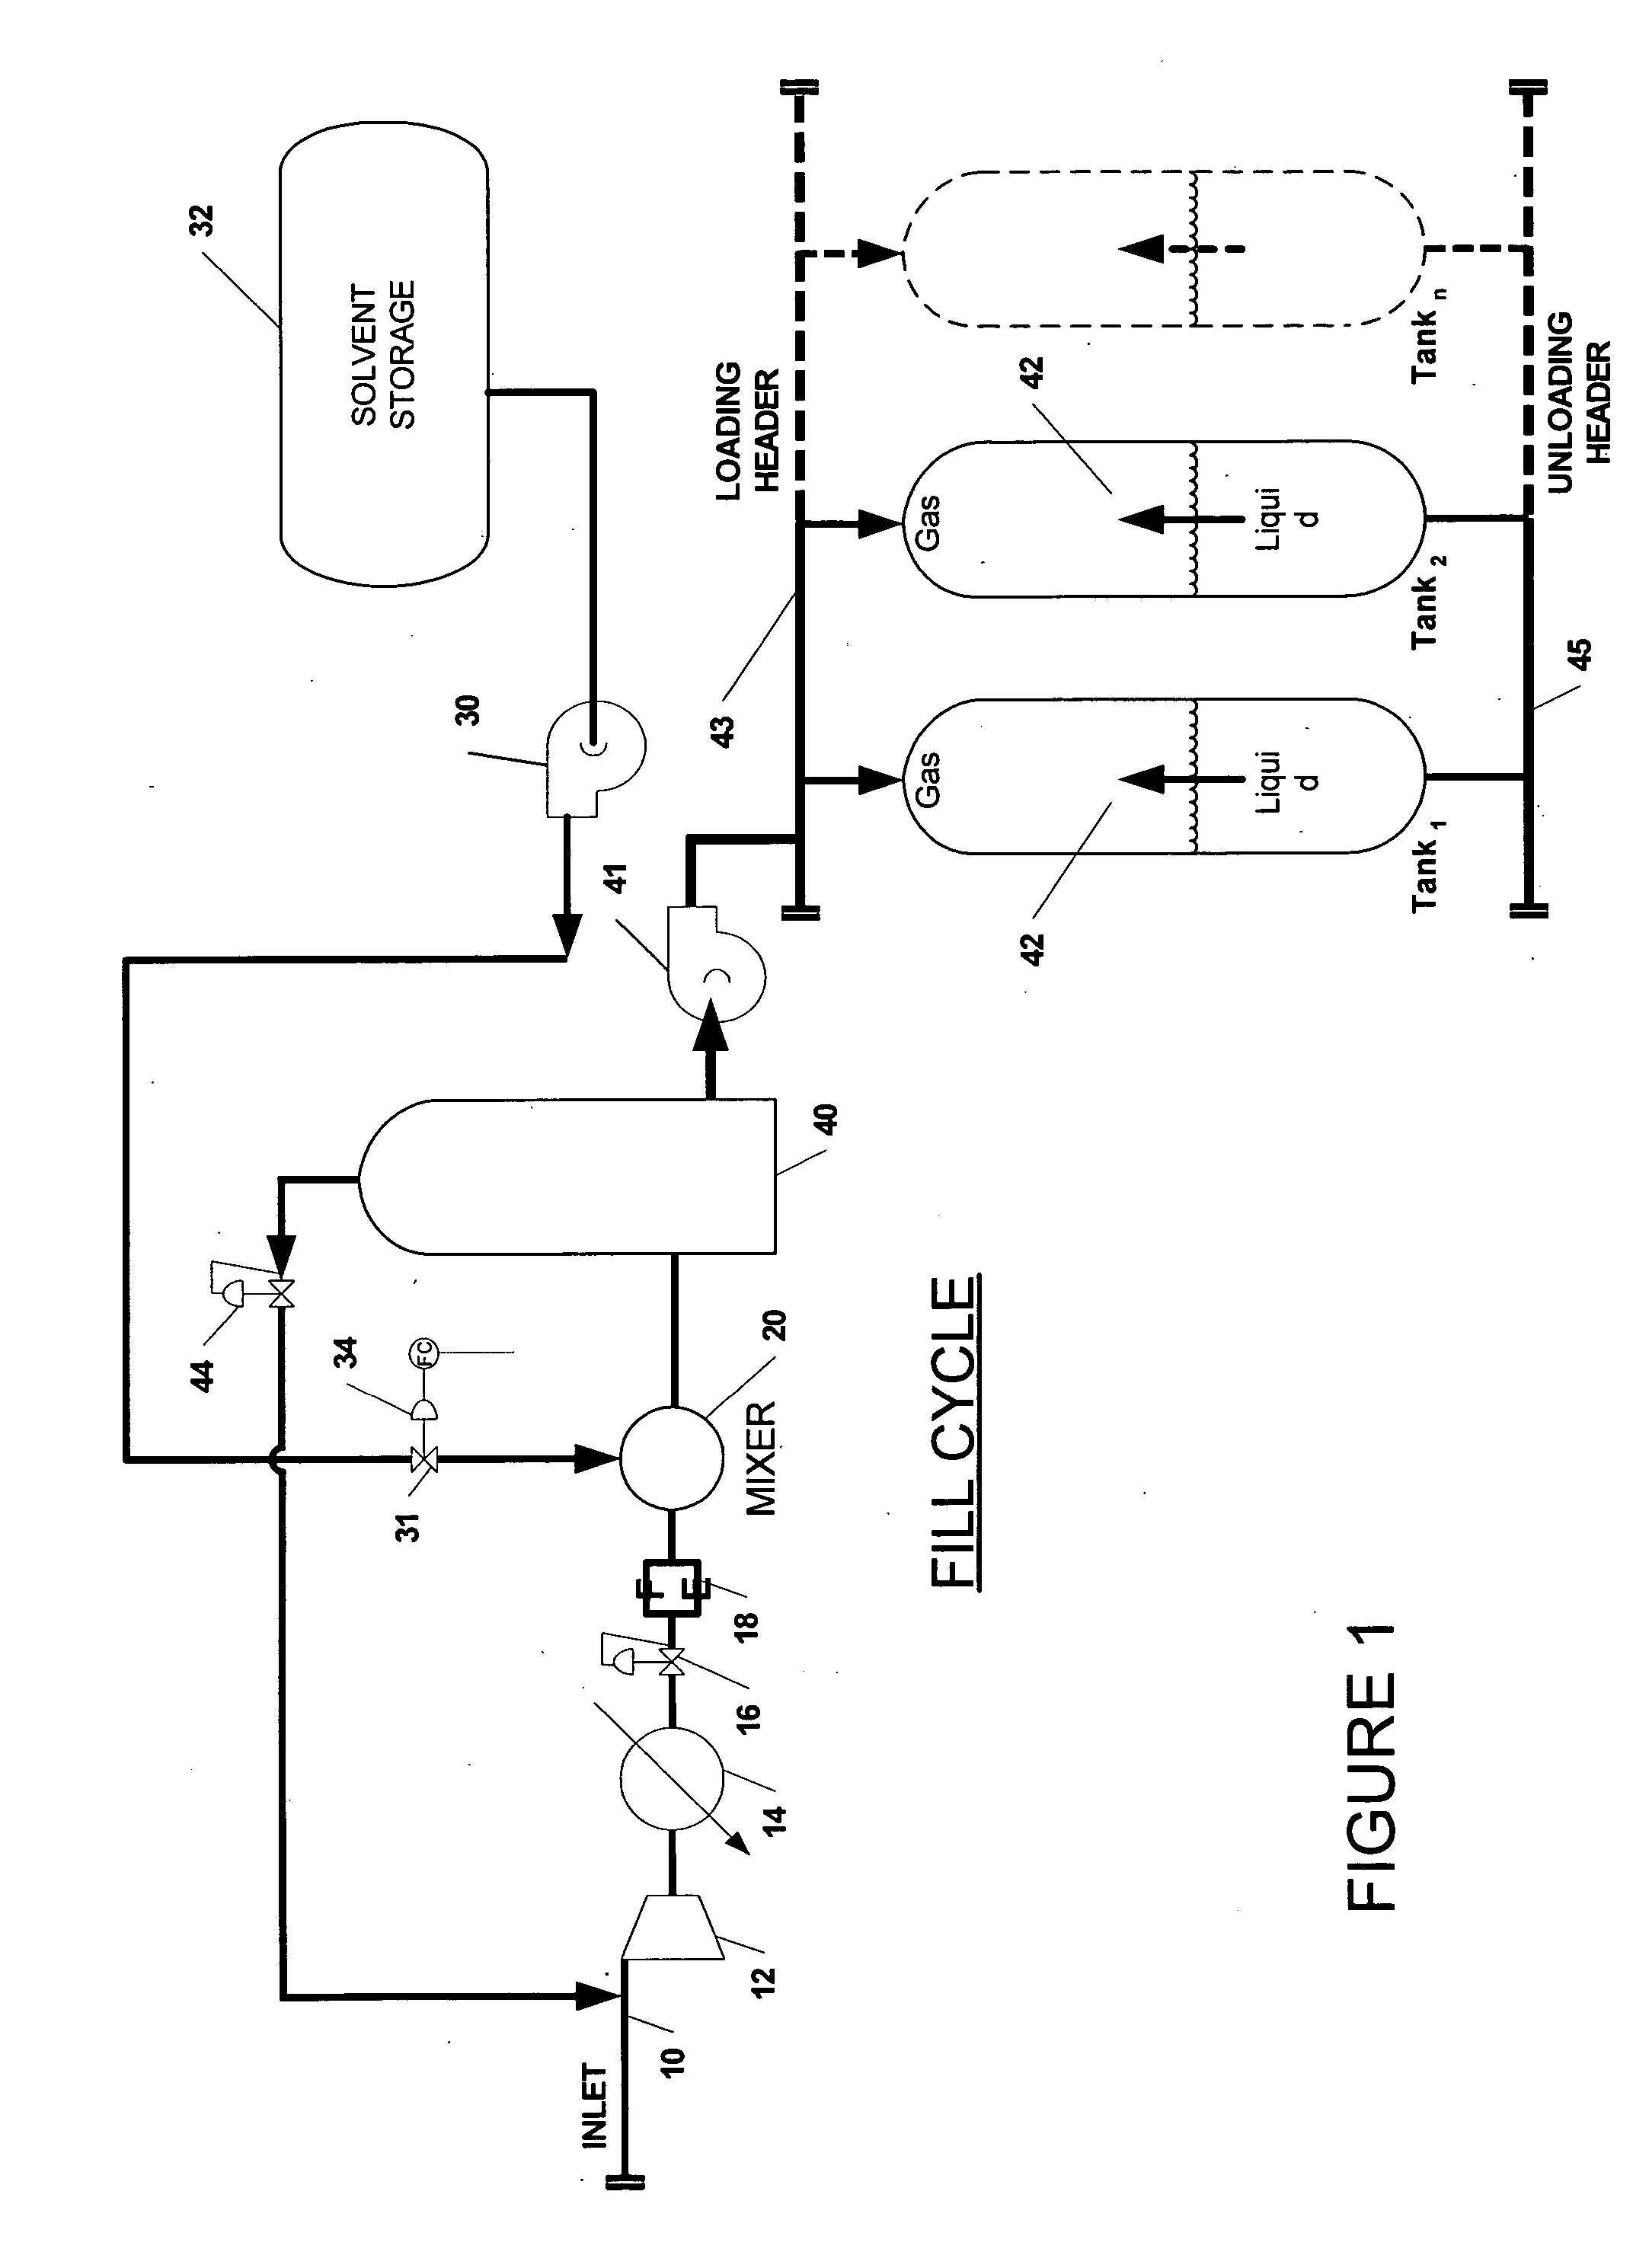 Storage of natural gas in liquid solvents and methods to absorb and segregate natural gas into and out of liquid solvents